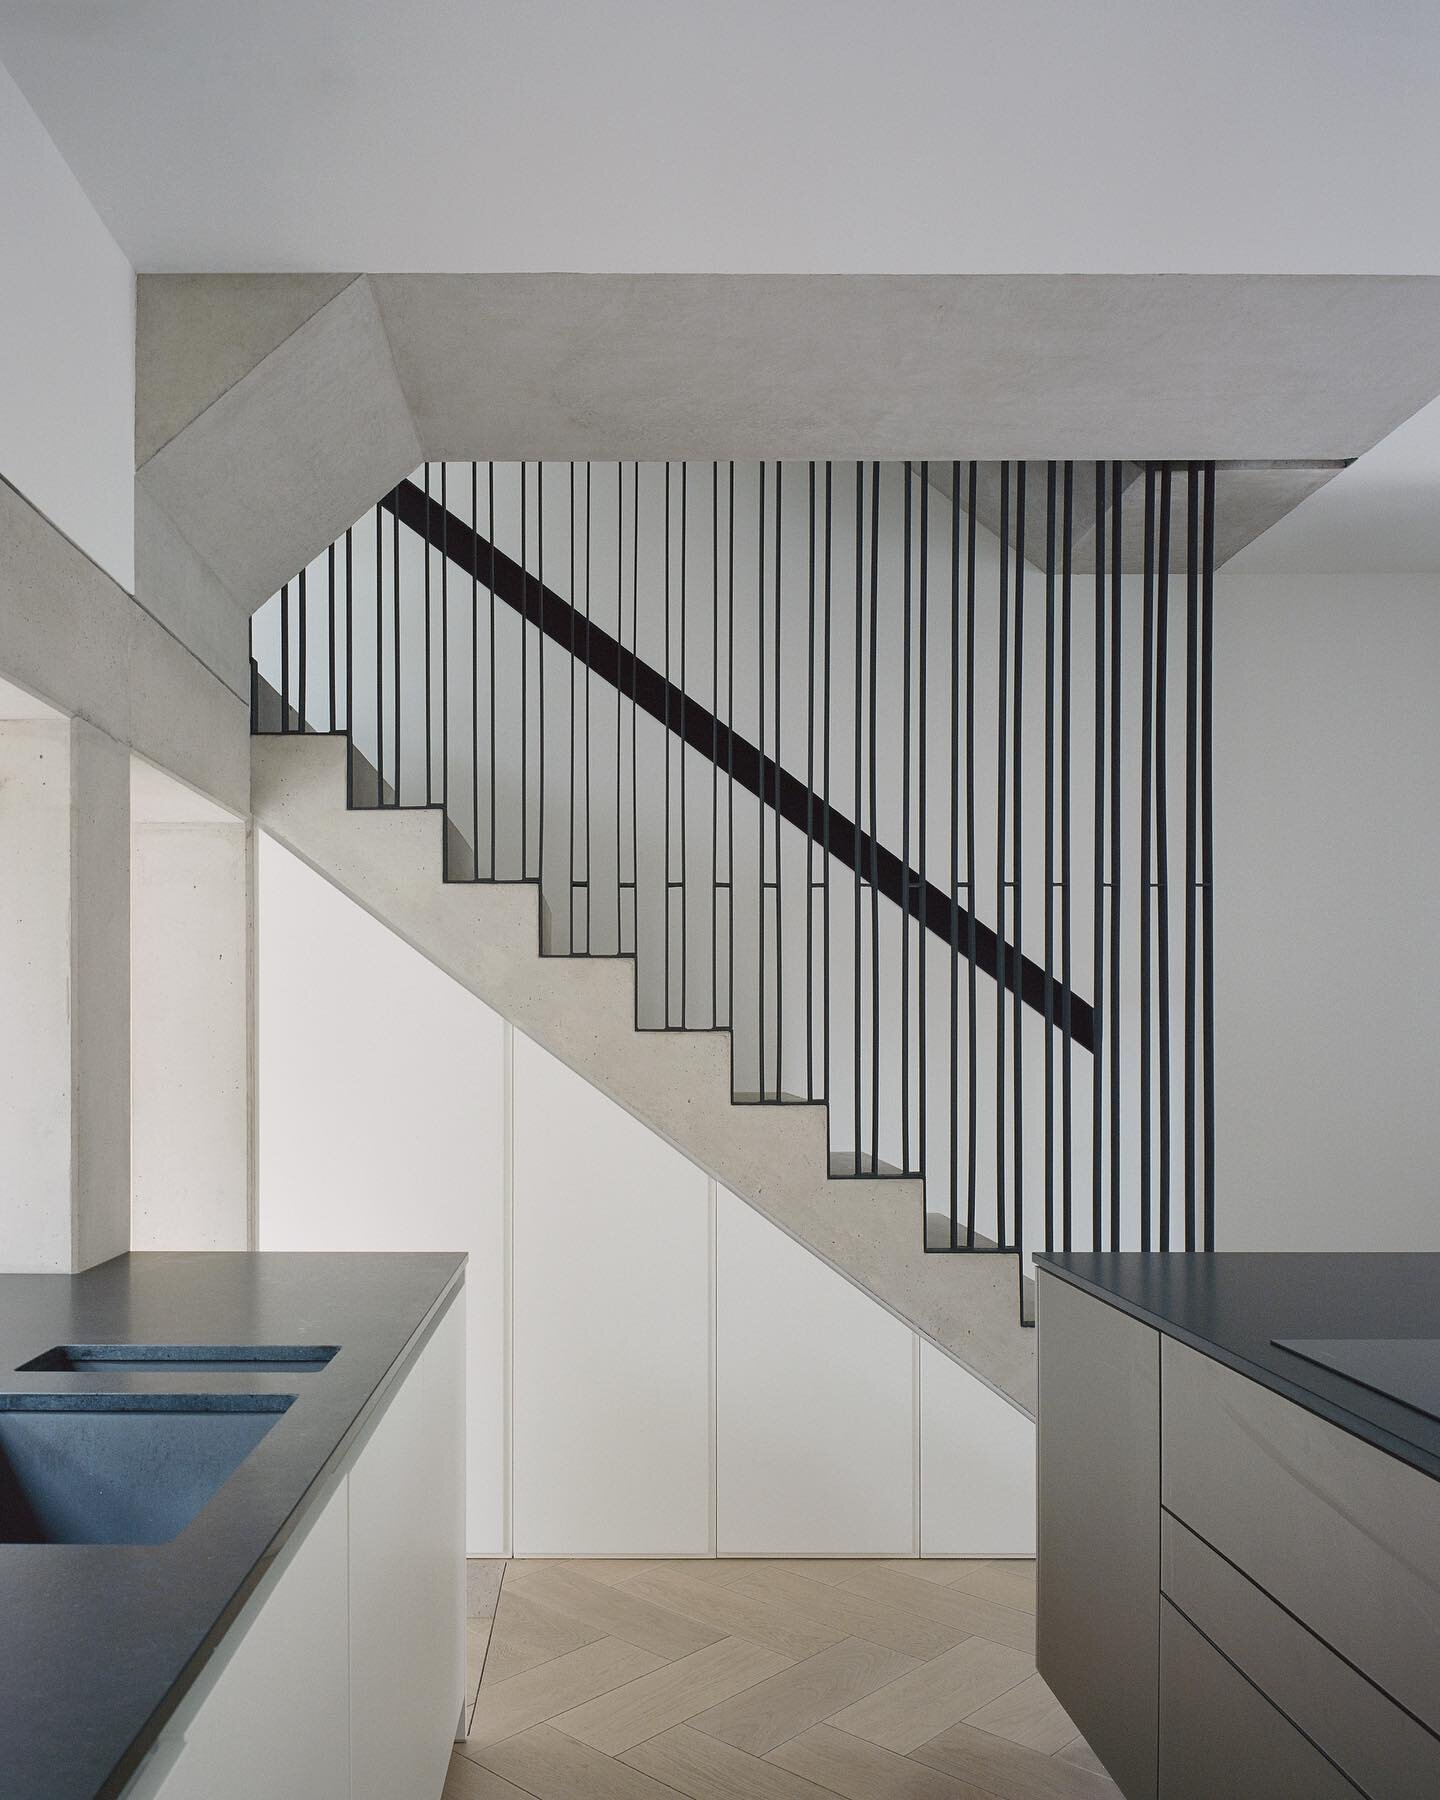 Framework House - the staircase is formed of precast concrete, with a bespoke metalwork balustrade that rises through the property.

Photography @arorygardiner
PR @salt_press